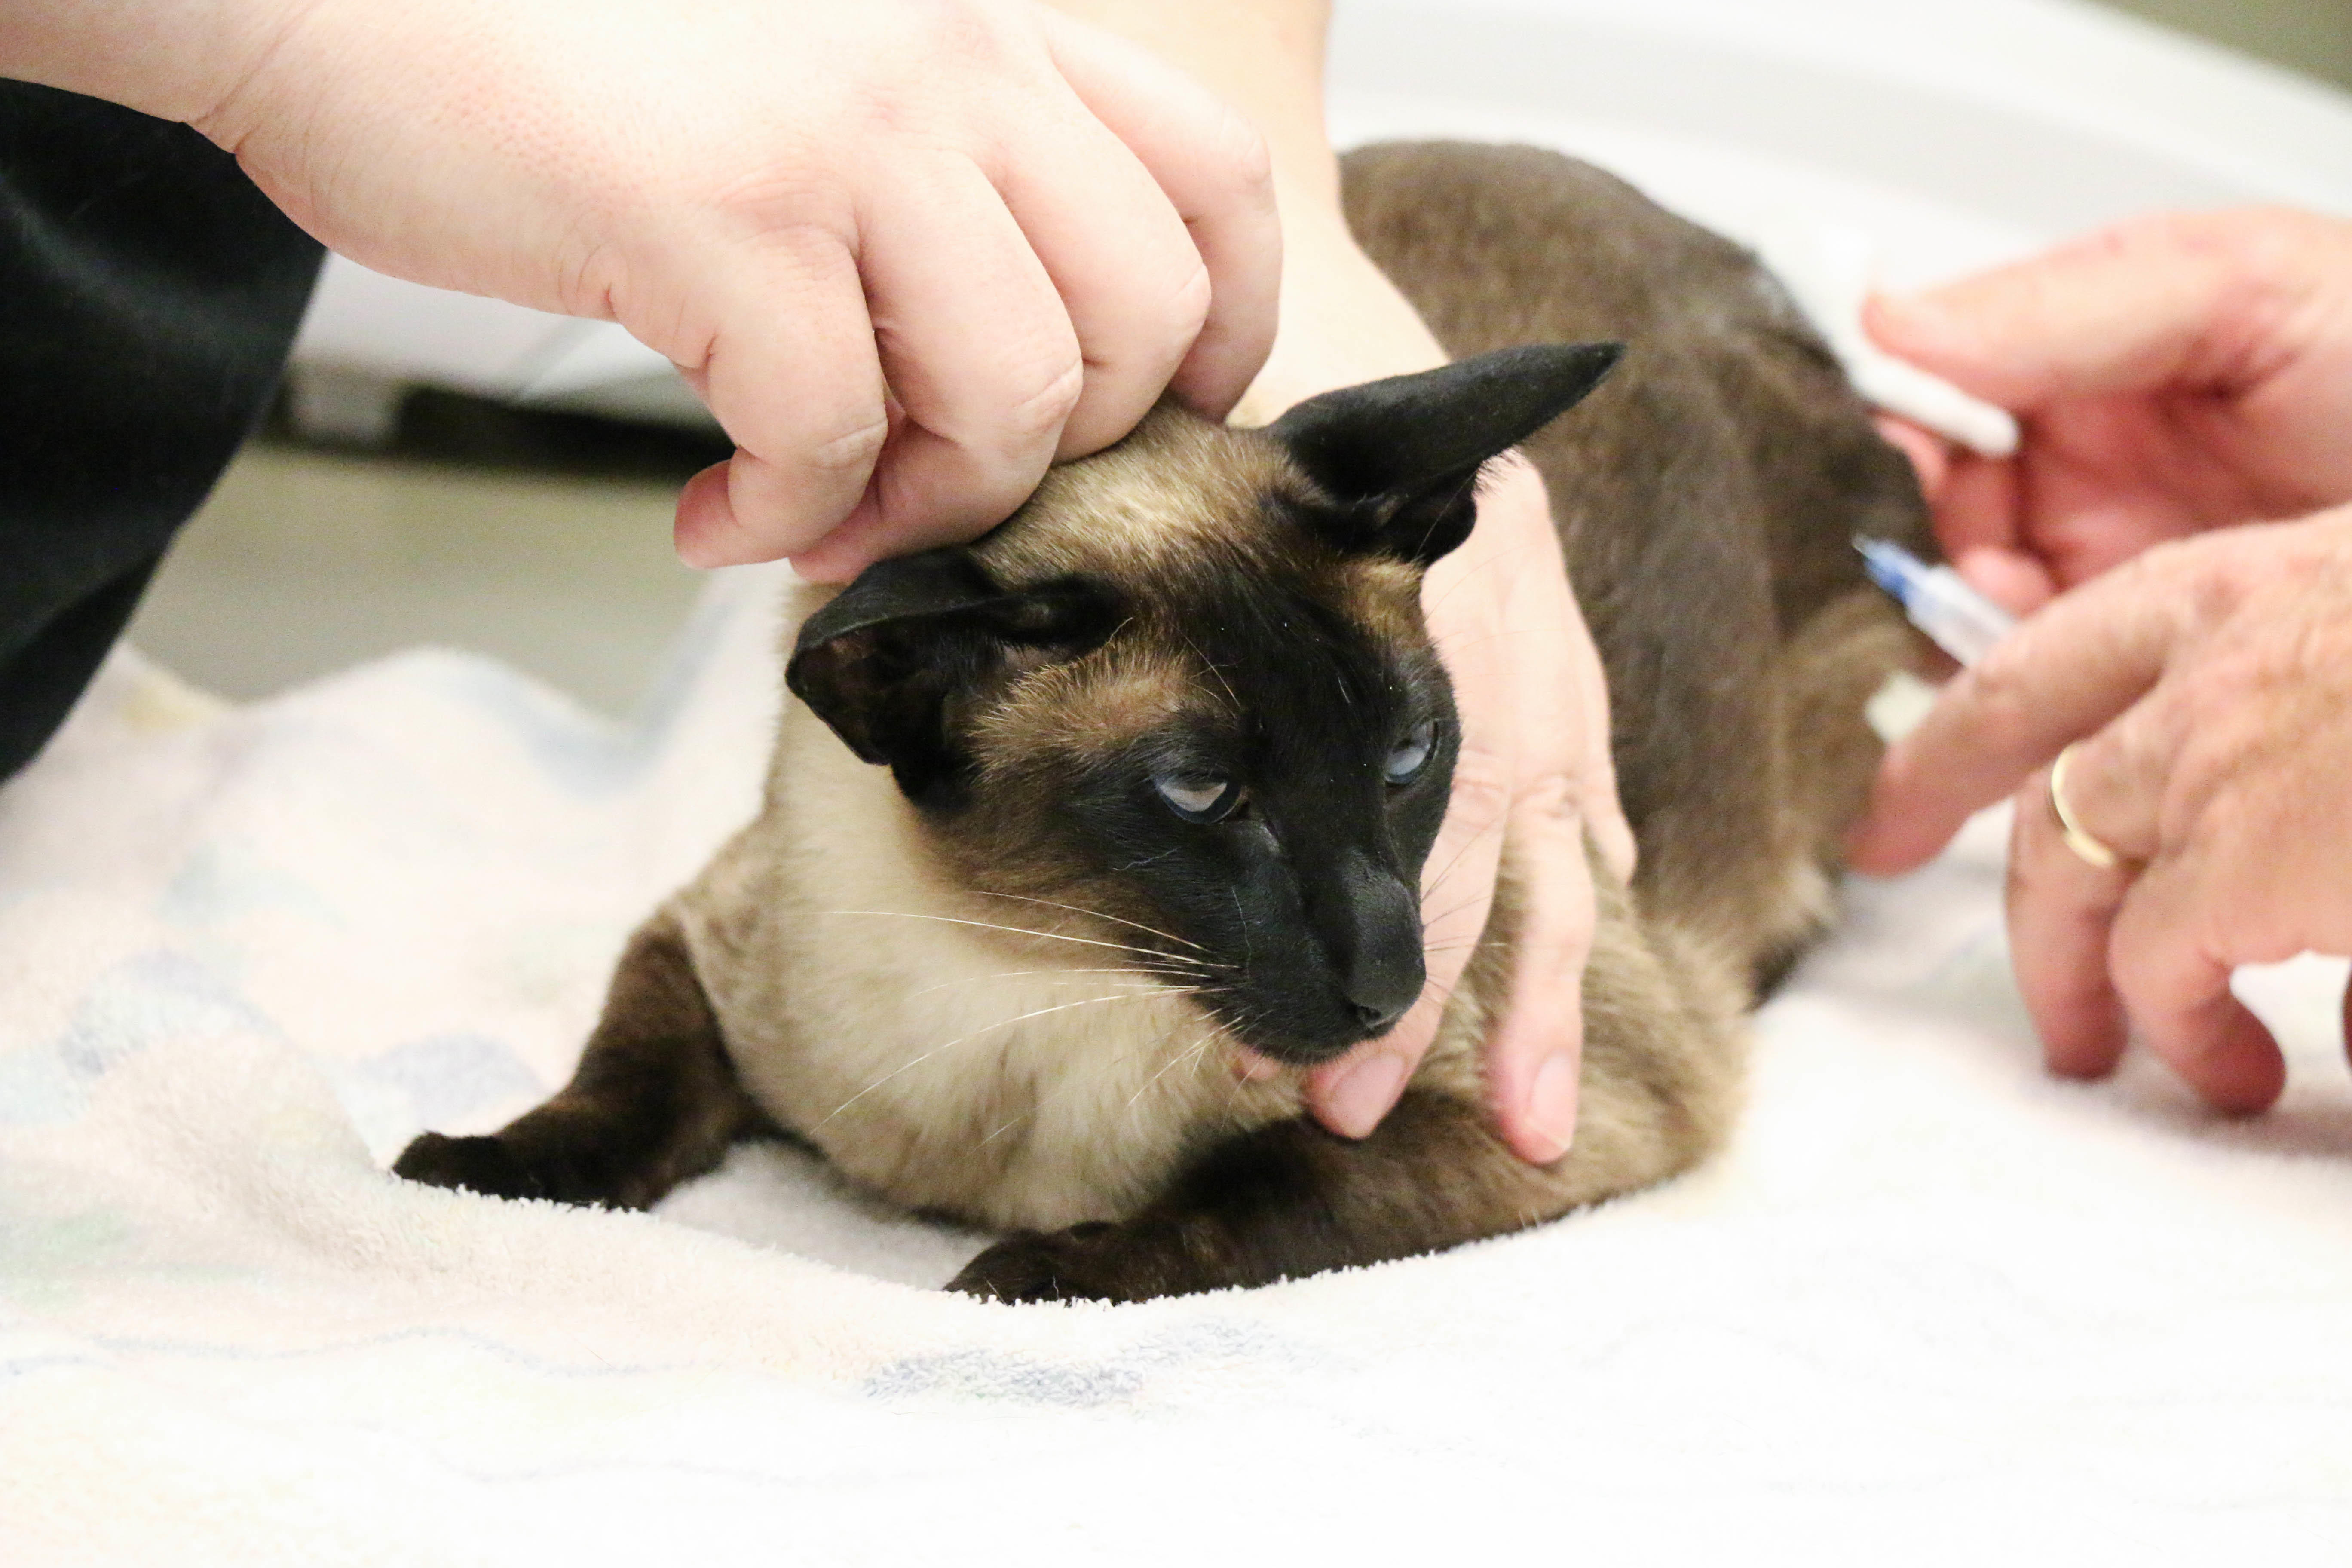 This beautiful Siamese patient is visiting us for routine vaccinations.